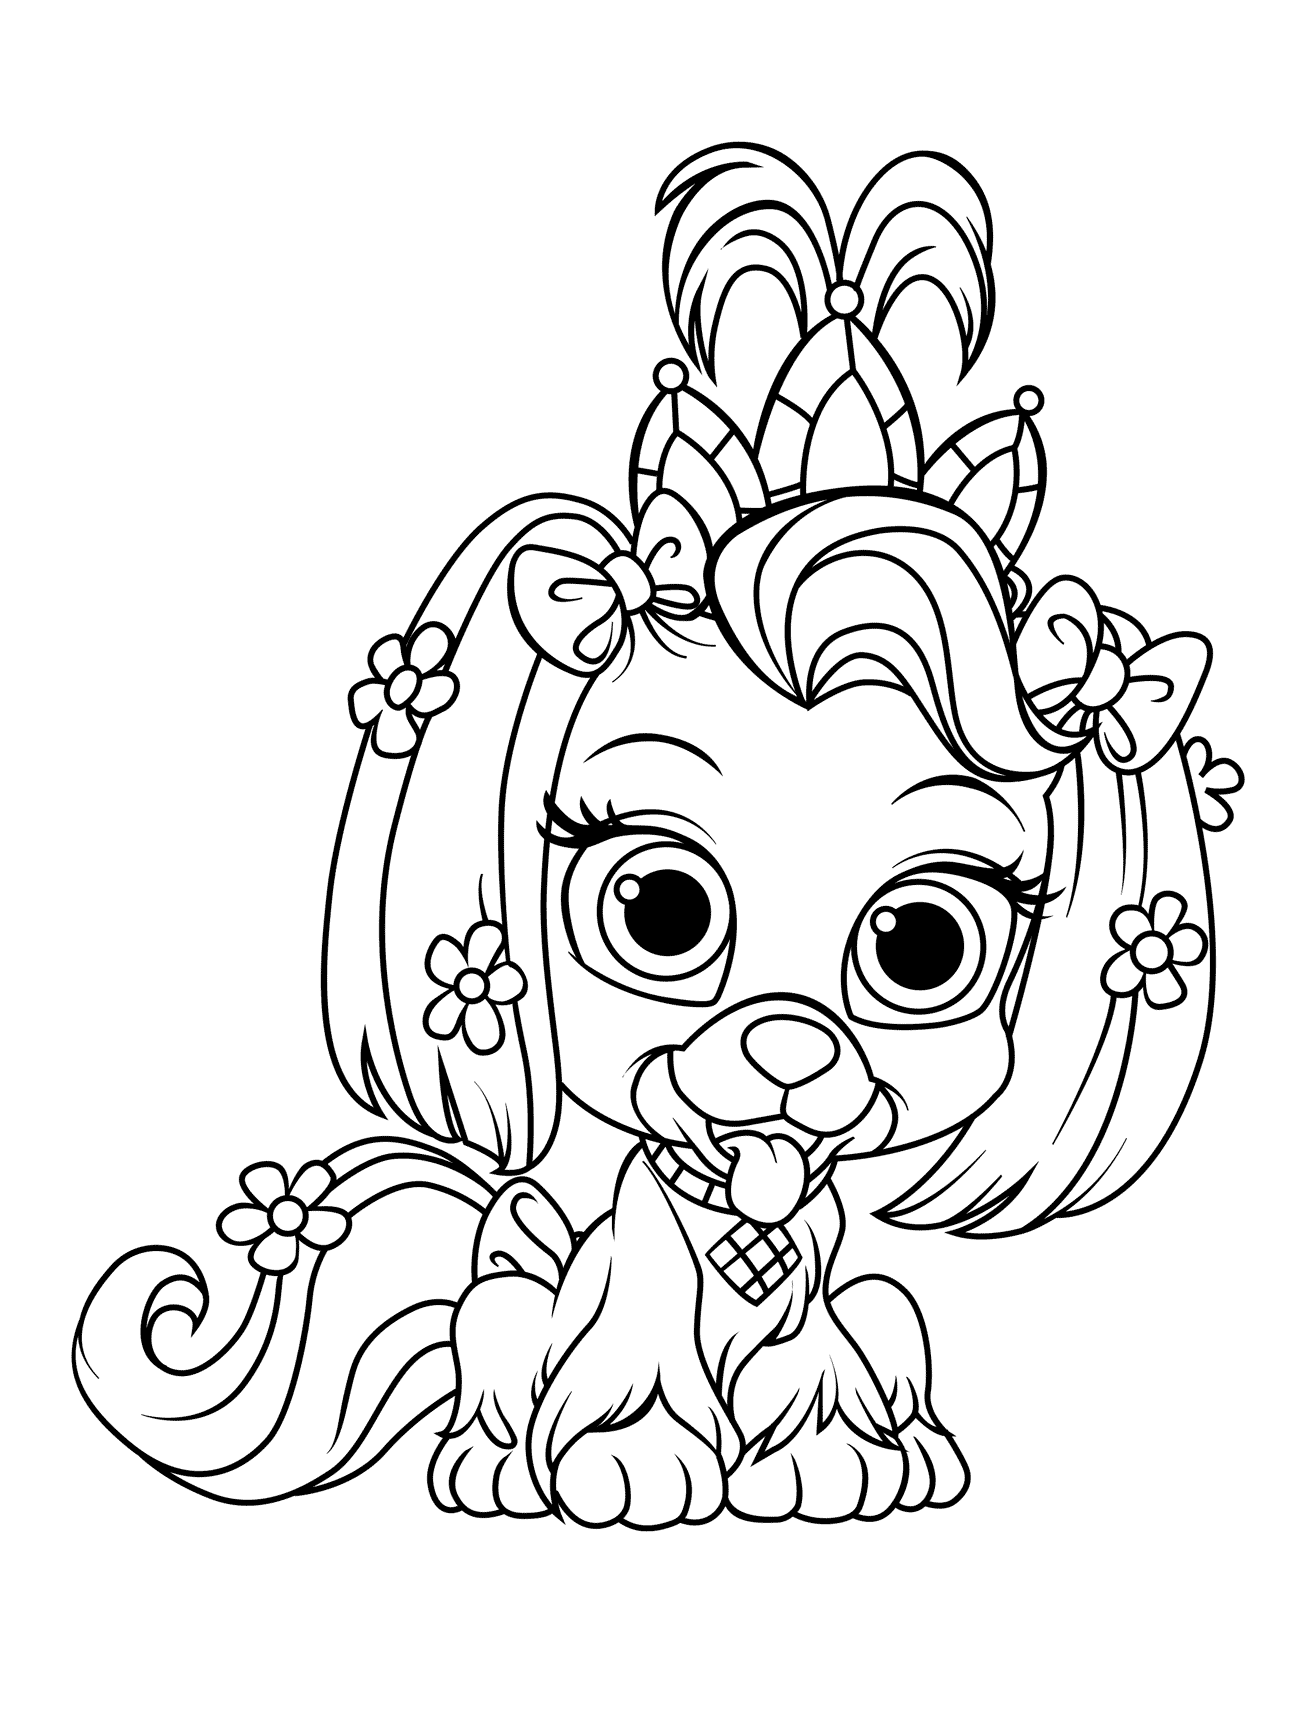 Download Coloring page - Puppy Chamomile